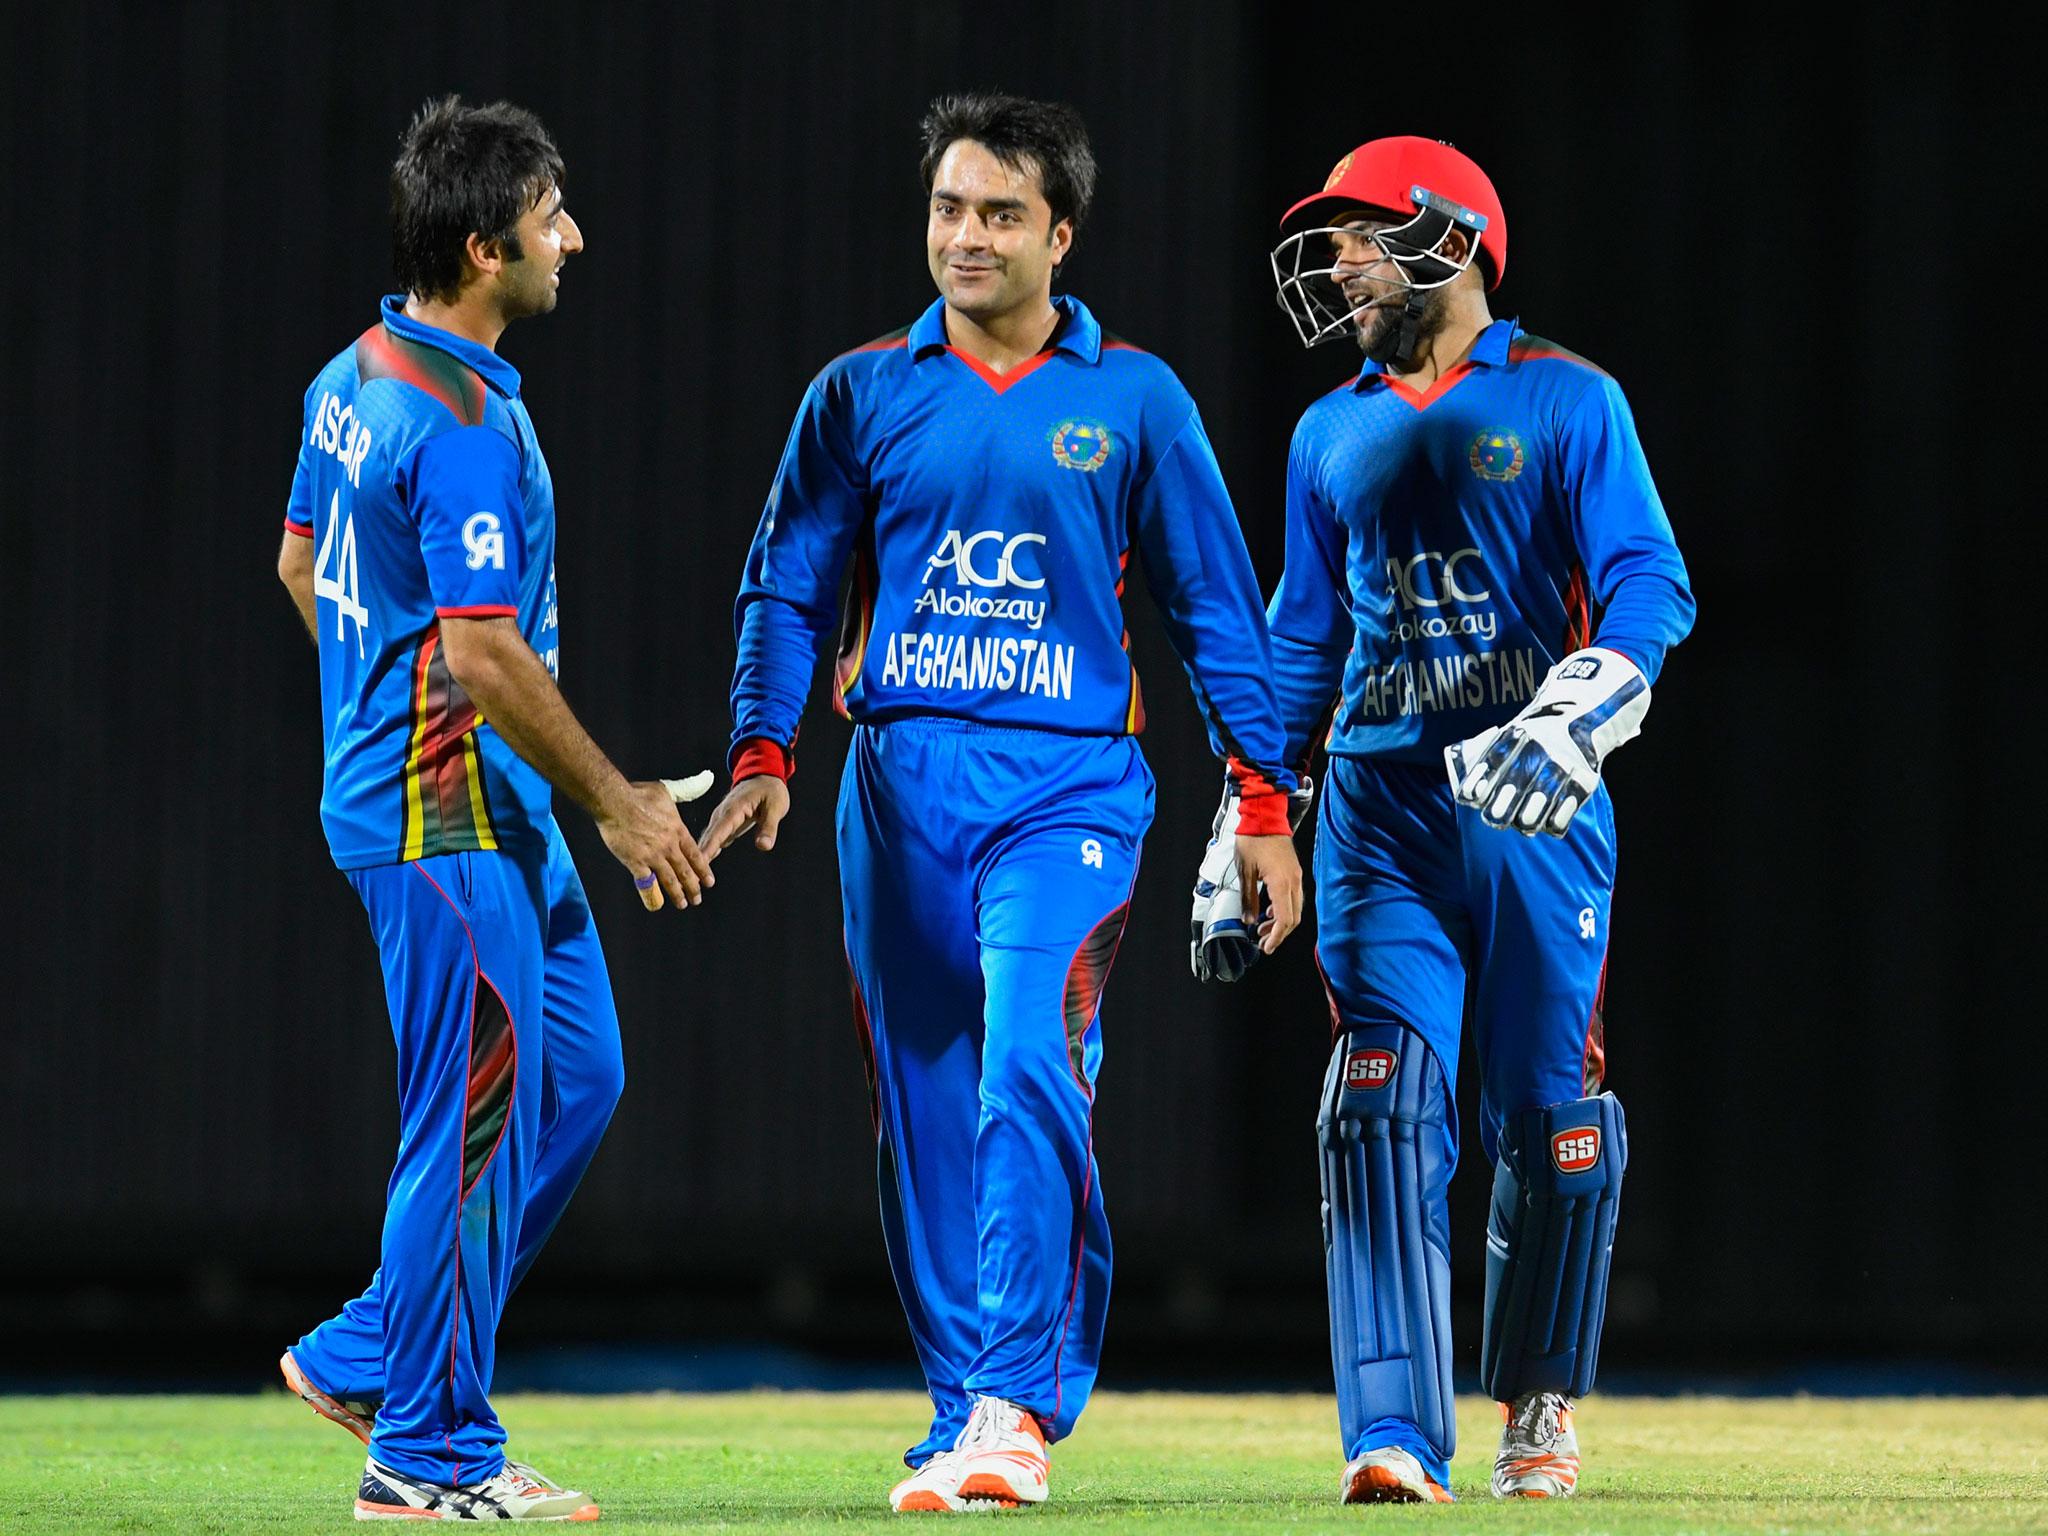 Rashid Khan is one of the most exciting teenagers in world cricket